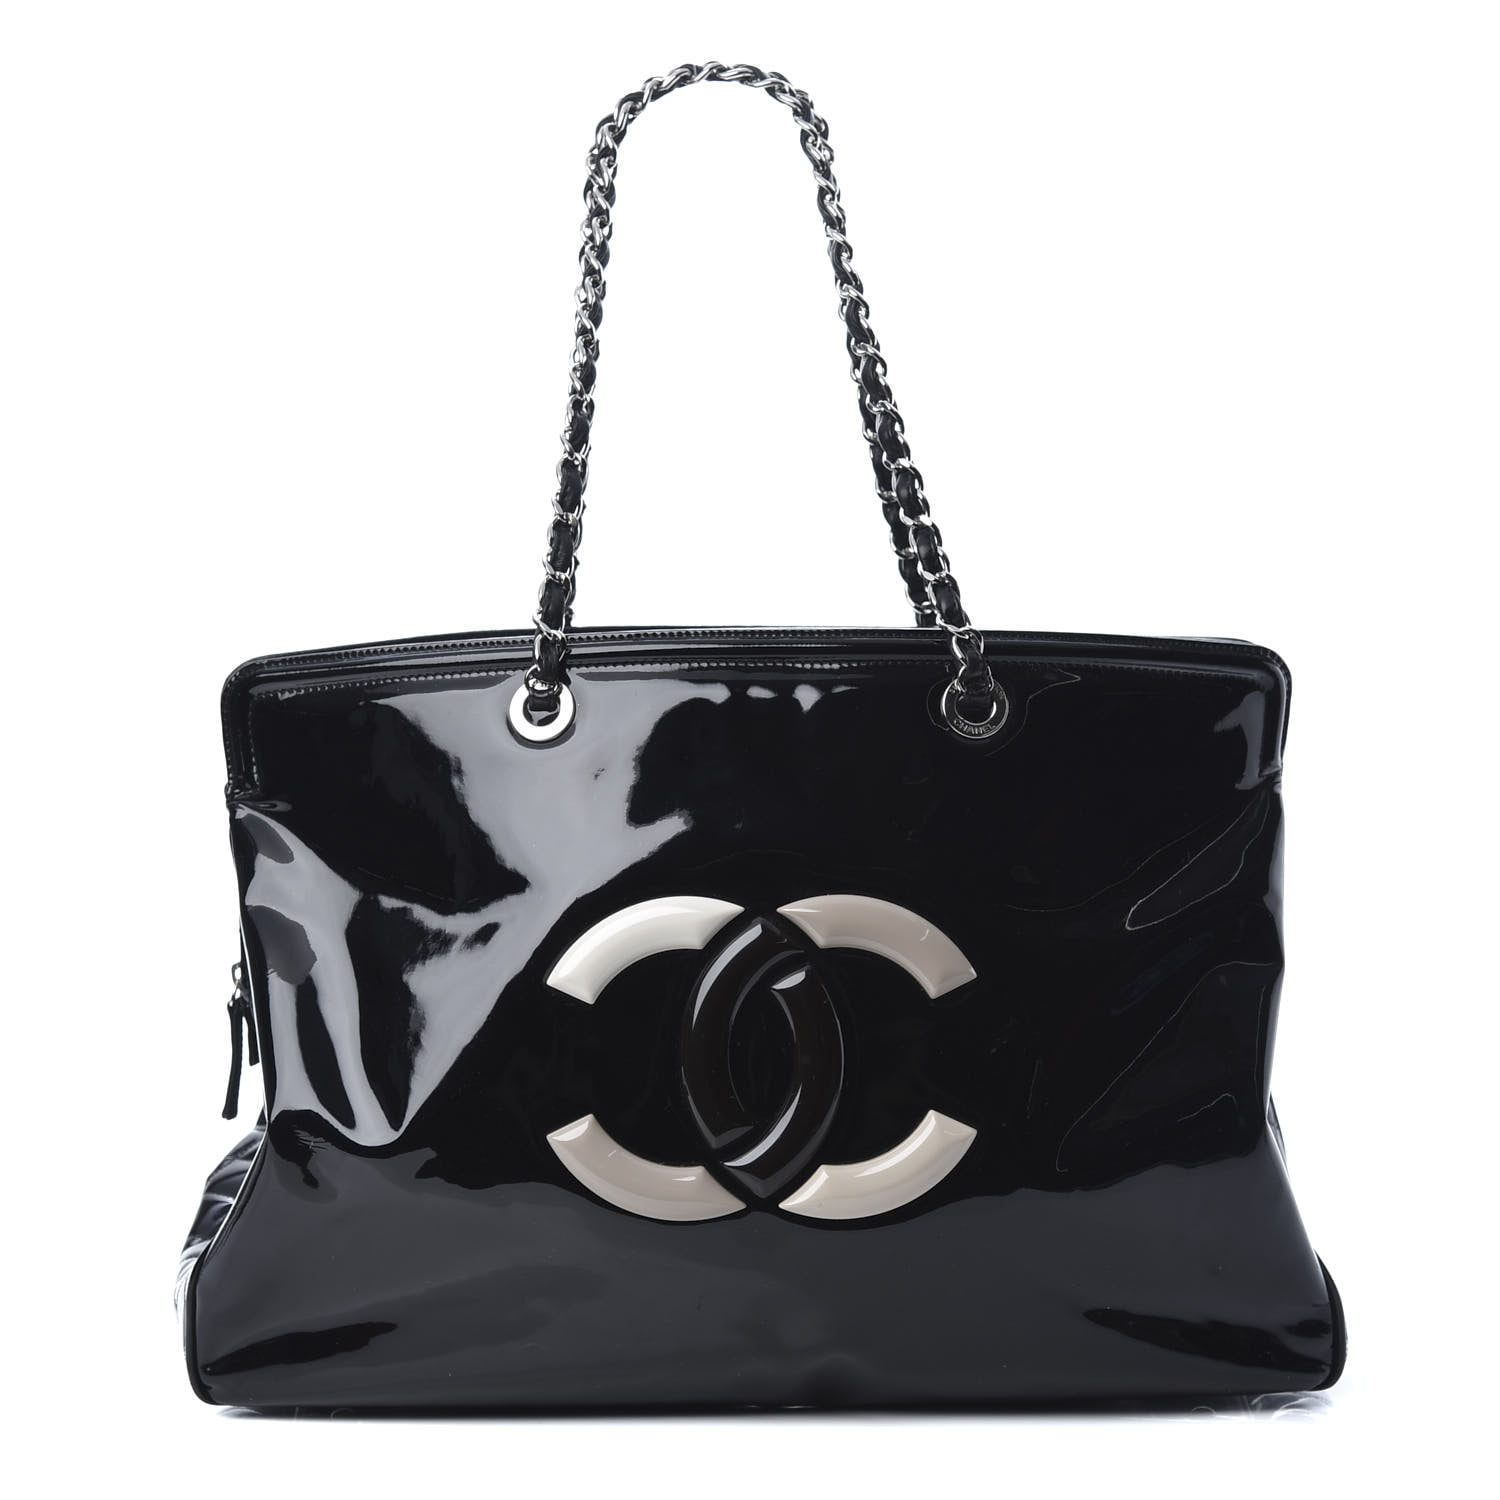 At Auction: Chanel Black and Beige Coated Canvas Central Station Tote